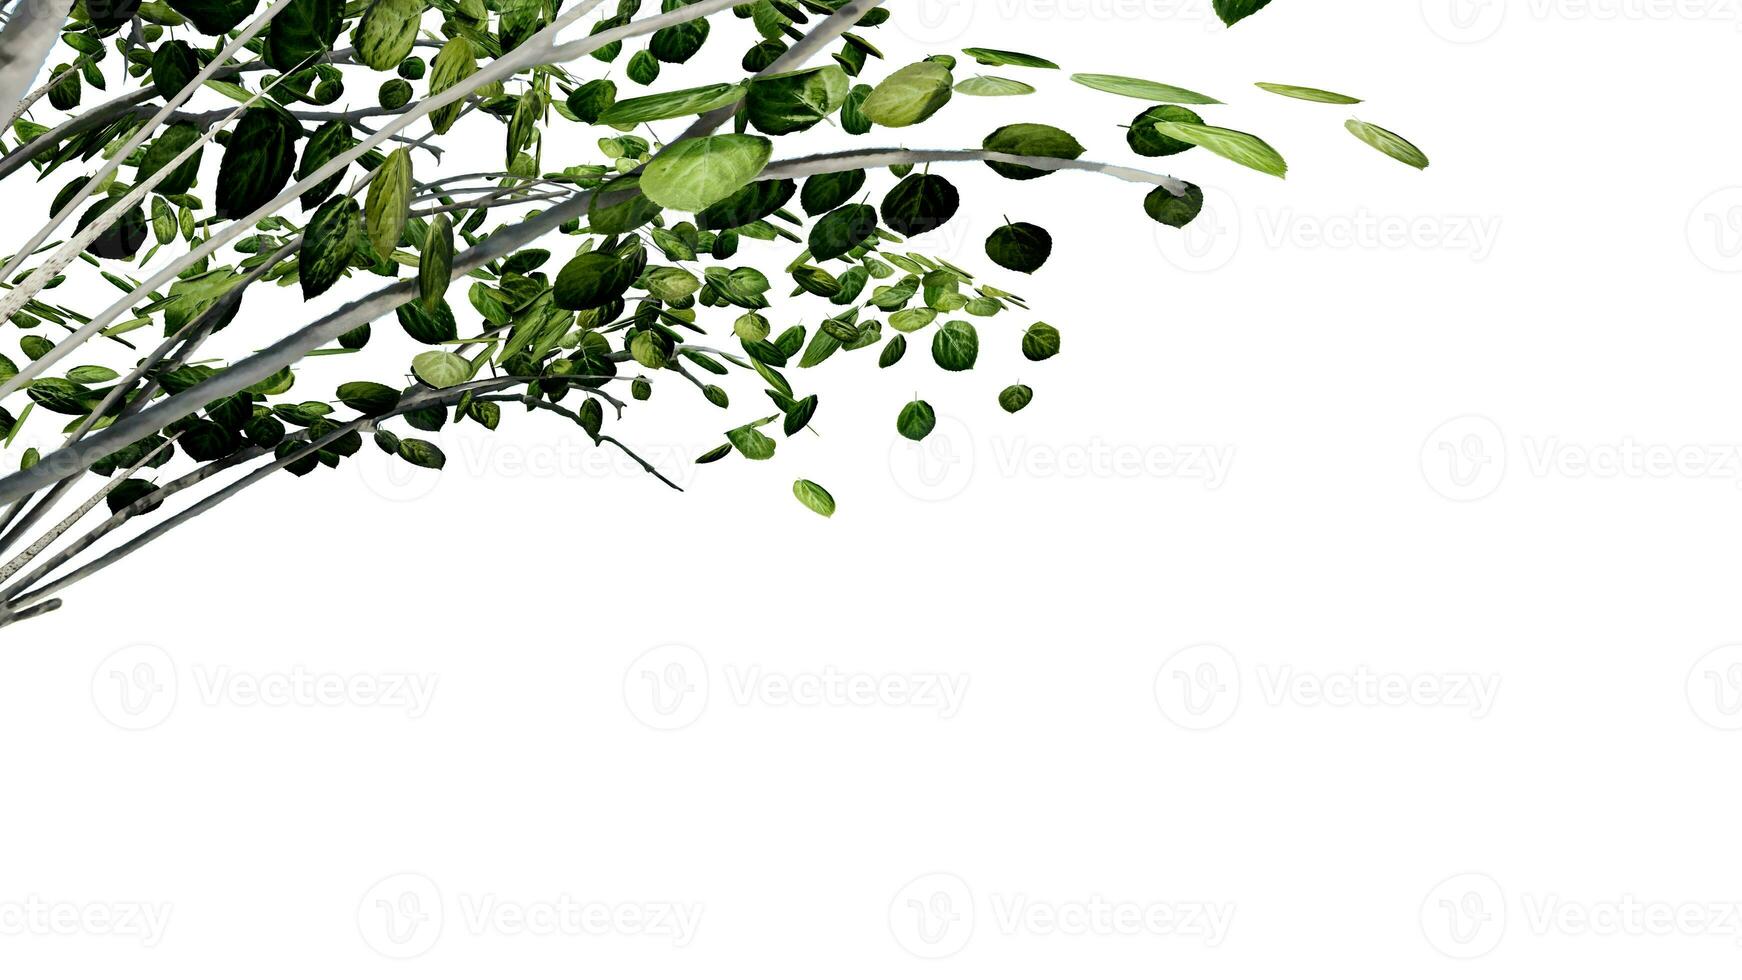 tree leave nature transparent cut out forest isolated background 3d render. photo